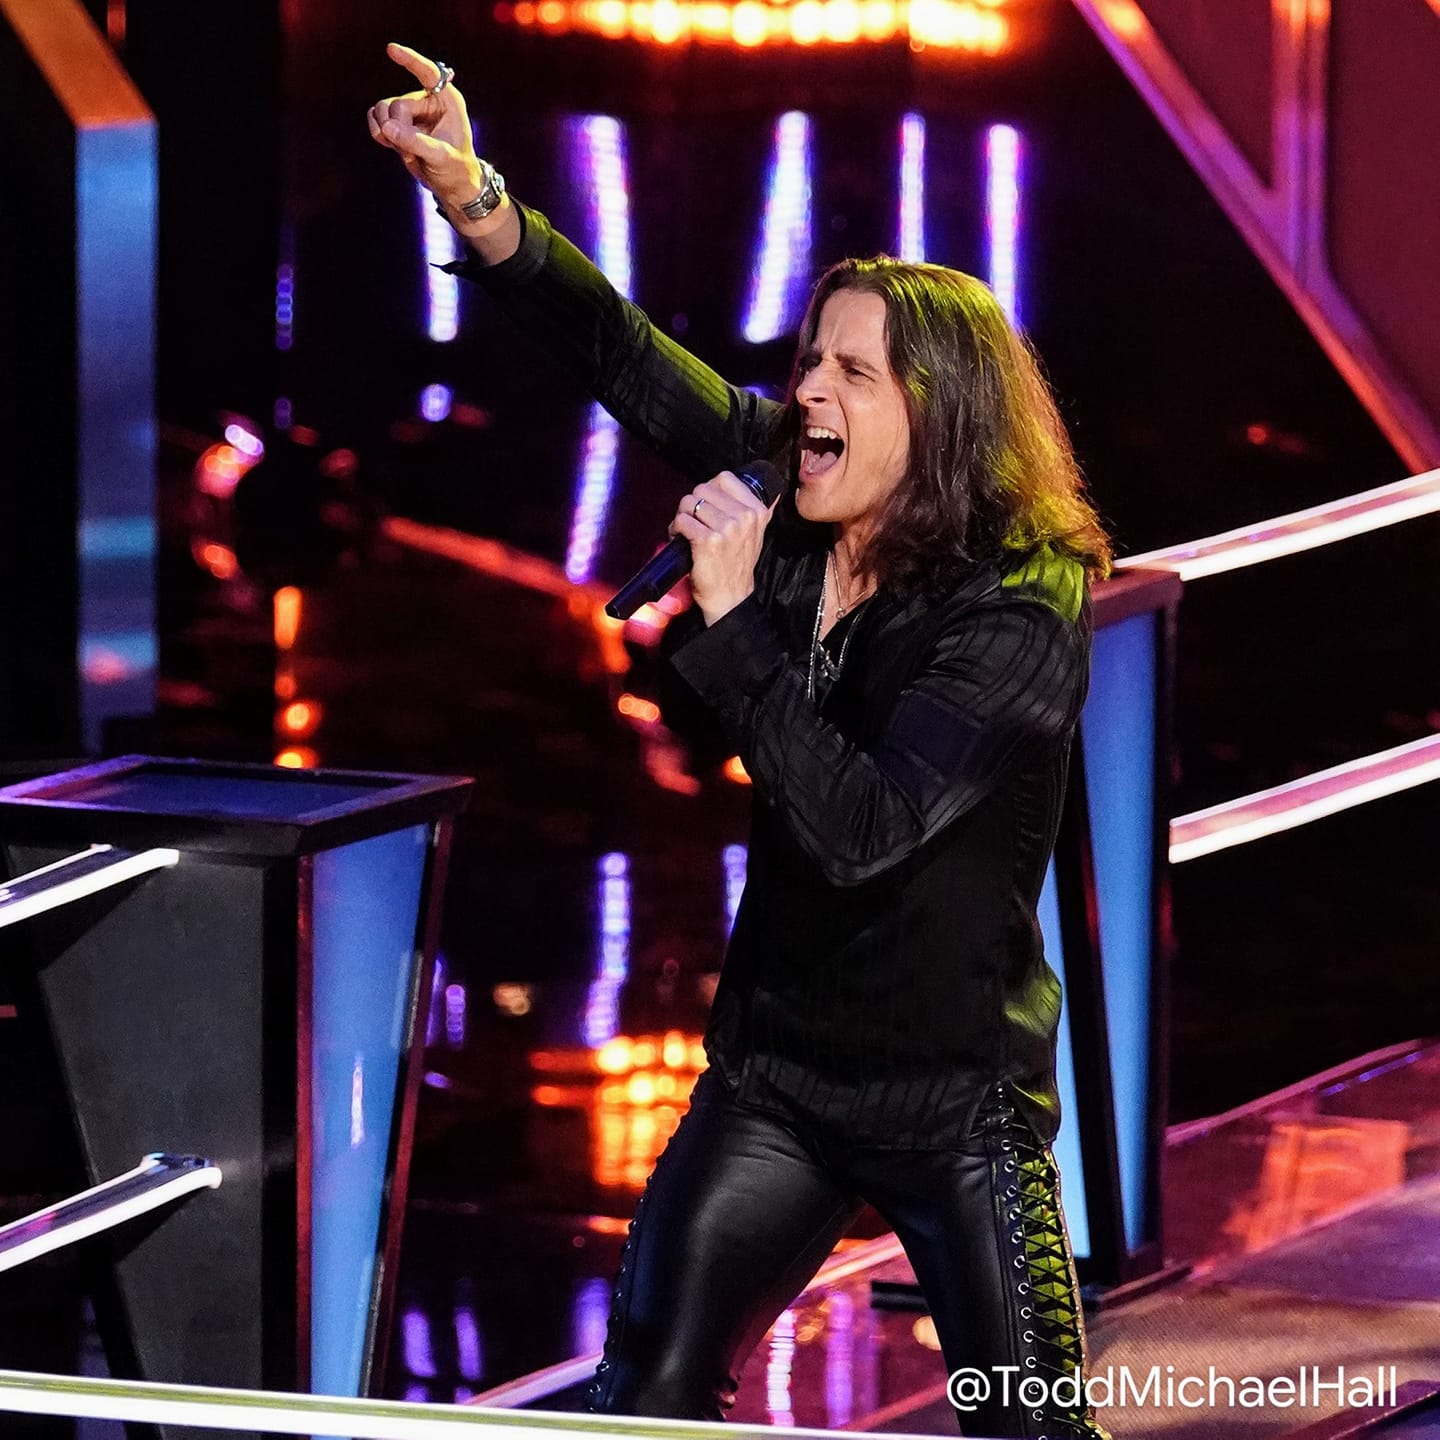 Todd Michael Hall from Saginaw amazes on NBC's "The Voice" Main Photo